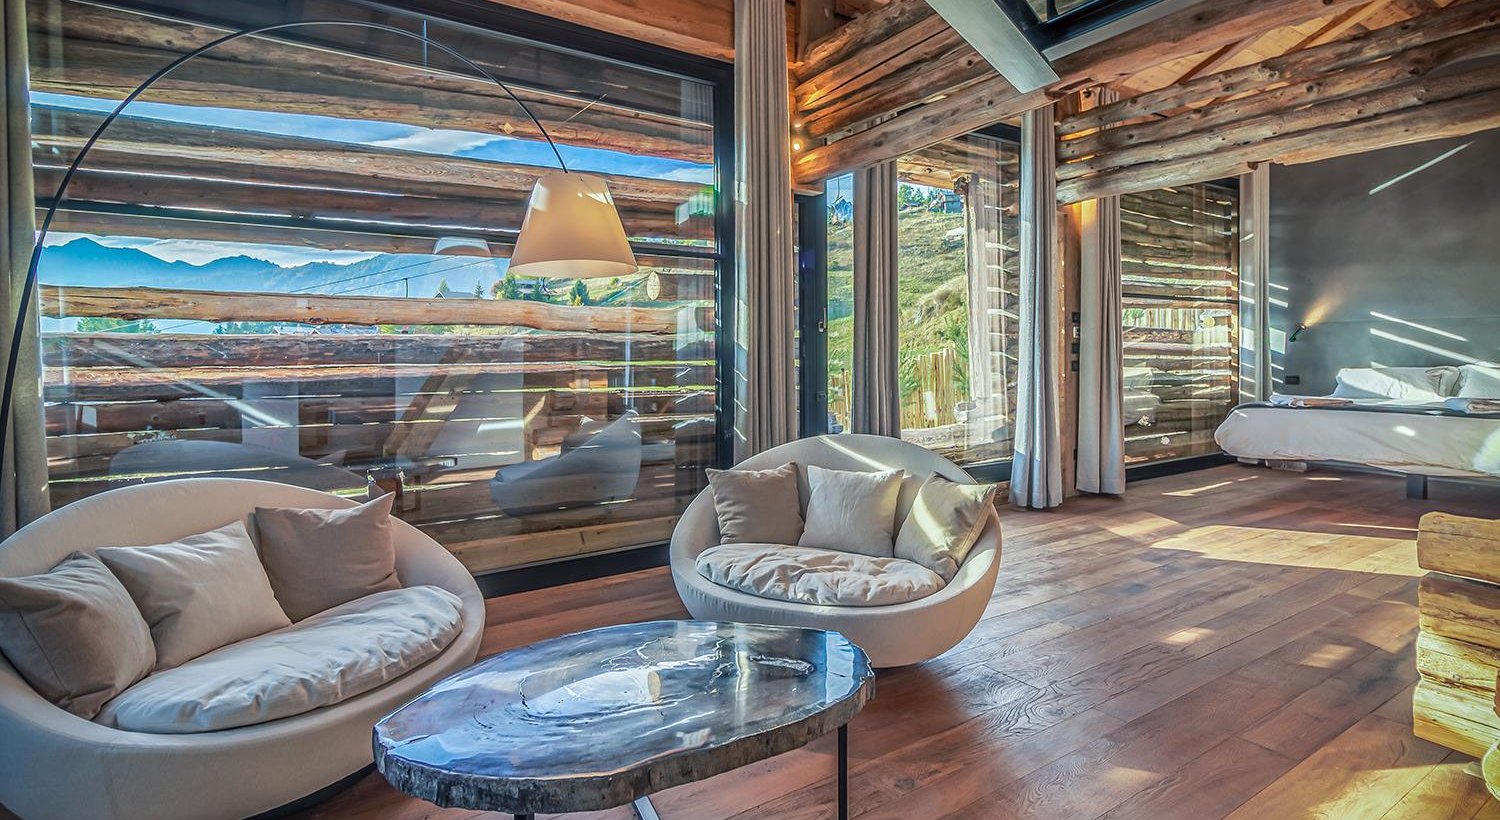 Interior of the Cocoon Deluxe Chalet